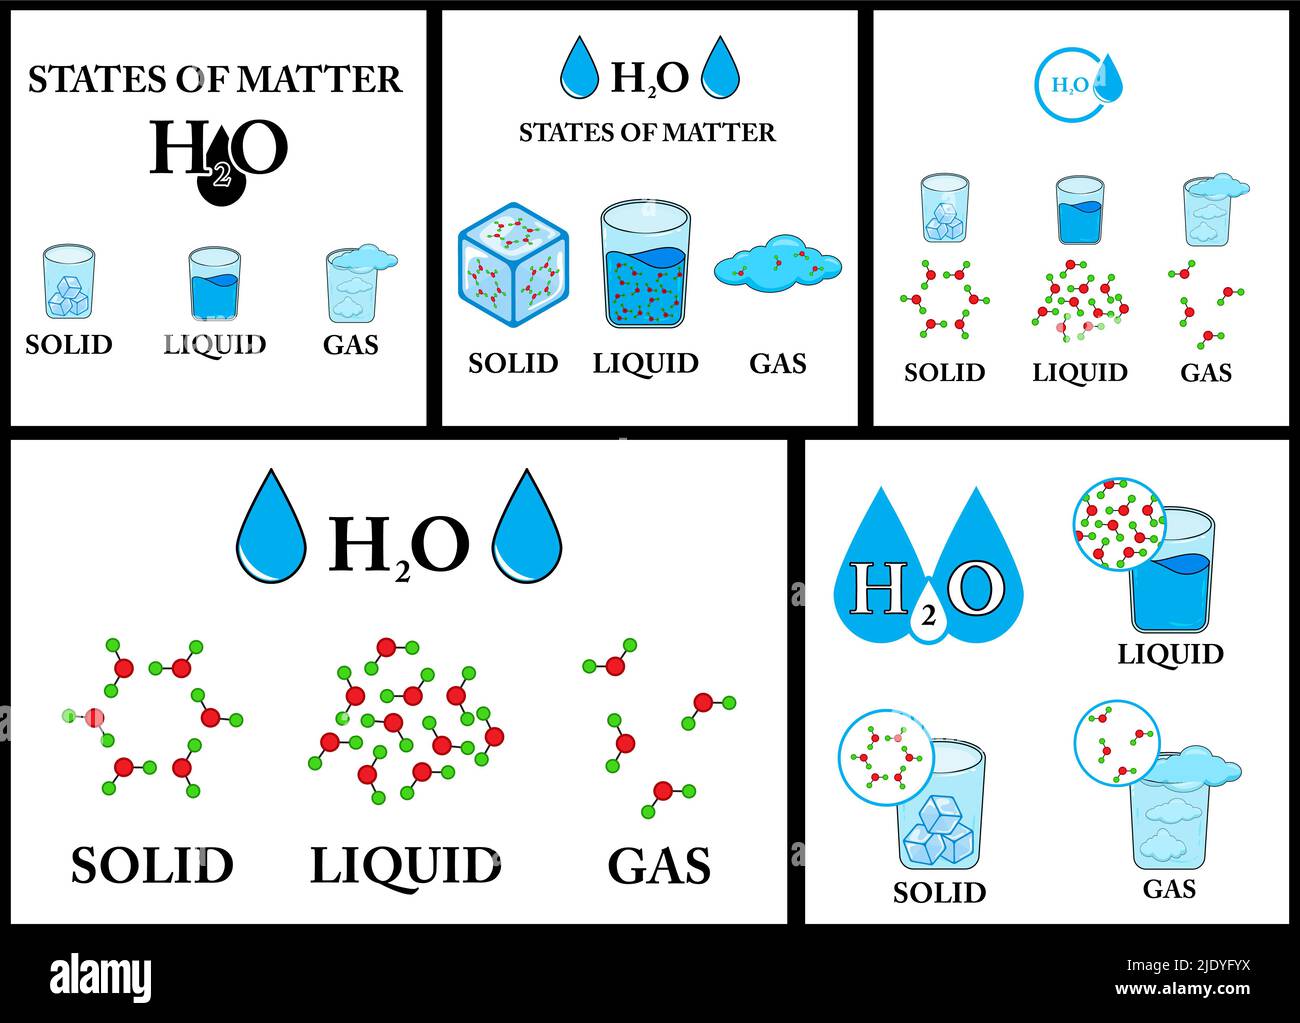 Density of matter with gas, liquid and solid water states outline diagram Stock Vector